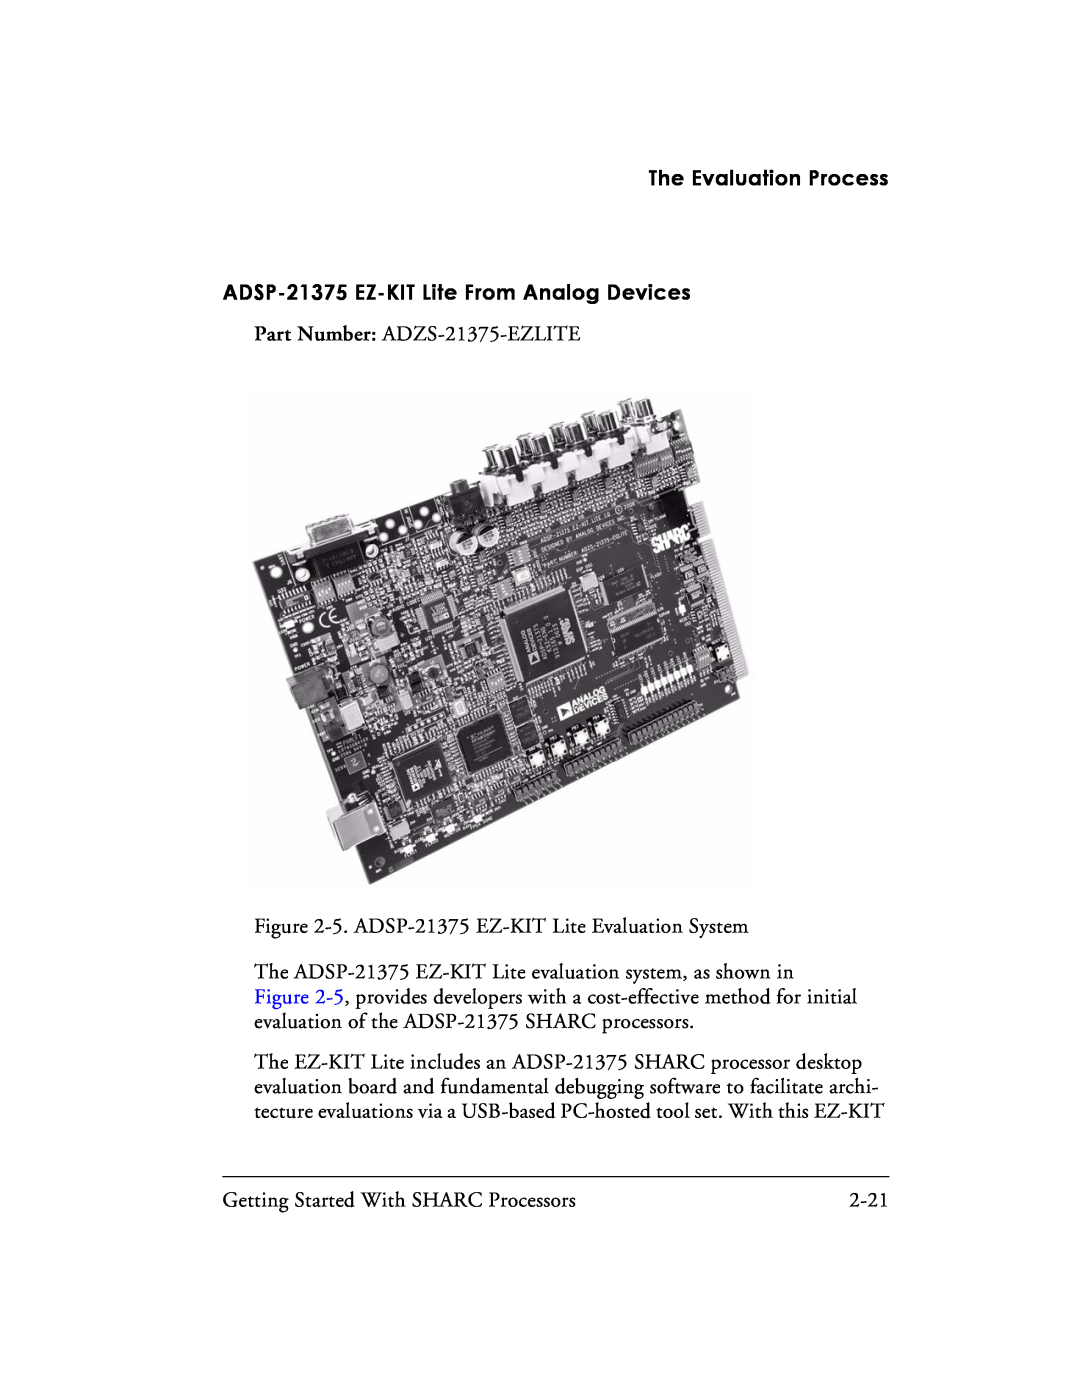 Analog Devices 82-003536-01 manual ADSP-21375 EZ-KITLite From Analog Devices, The Evaluation Process 